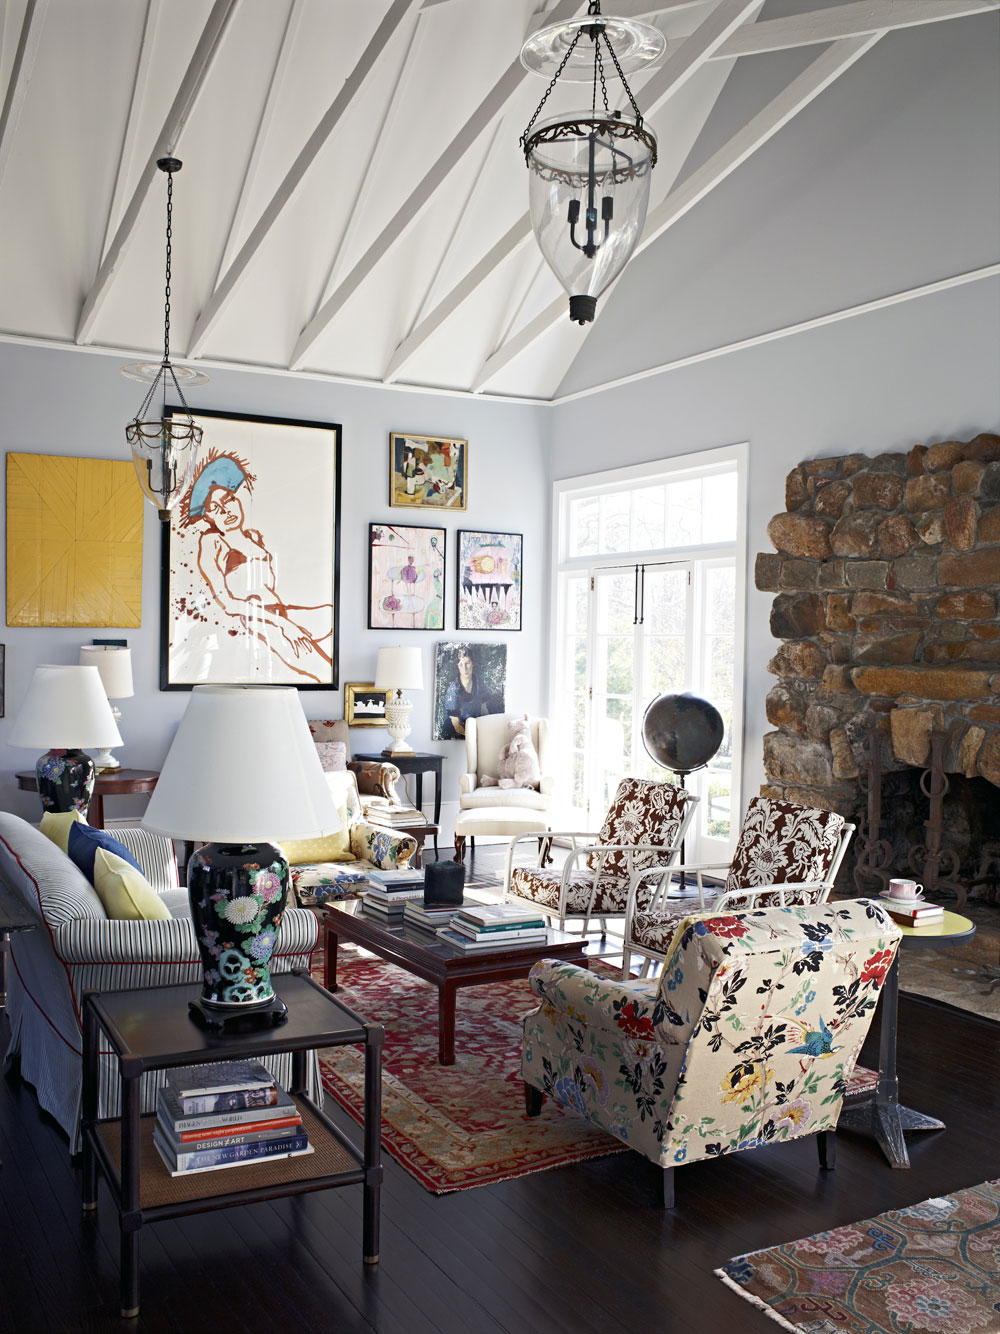 Steven Sclaroff | Architecture and interior design by Steven Sclaroff: the  Southampton Village house of Kate and Andy Spade.